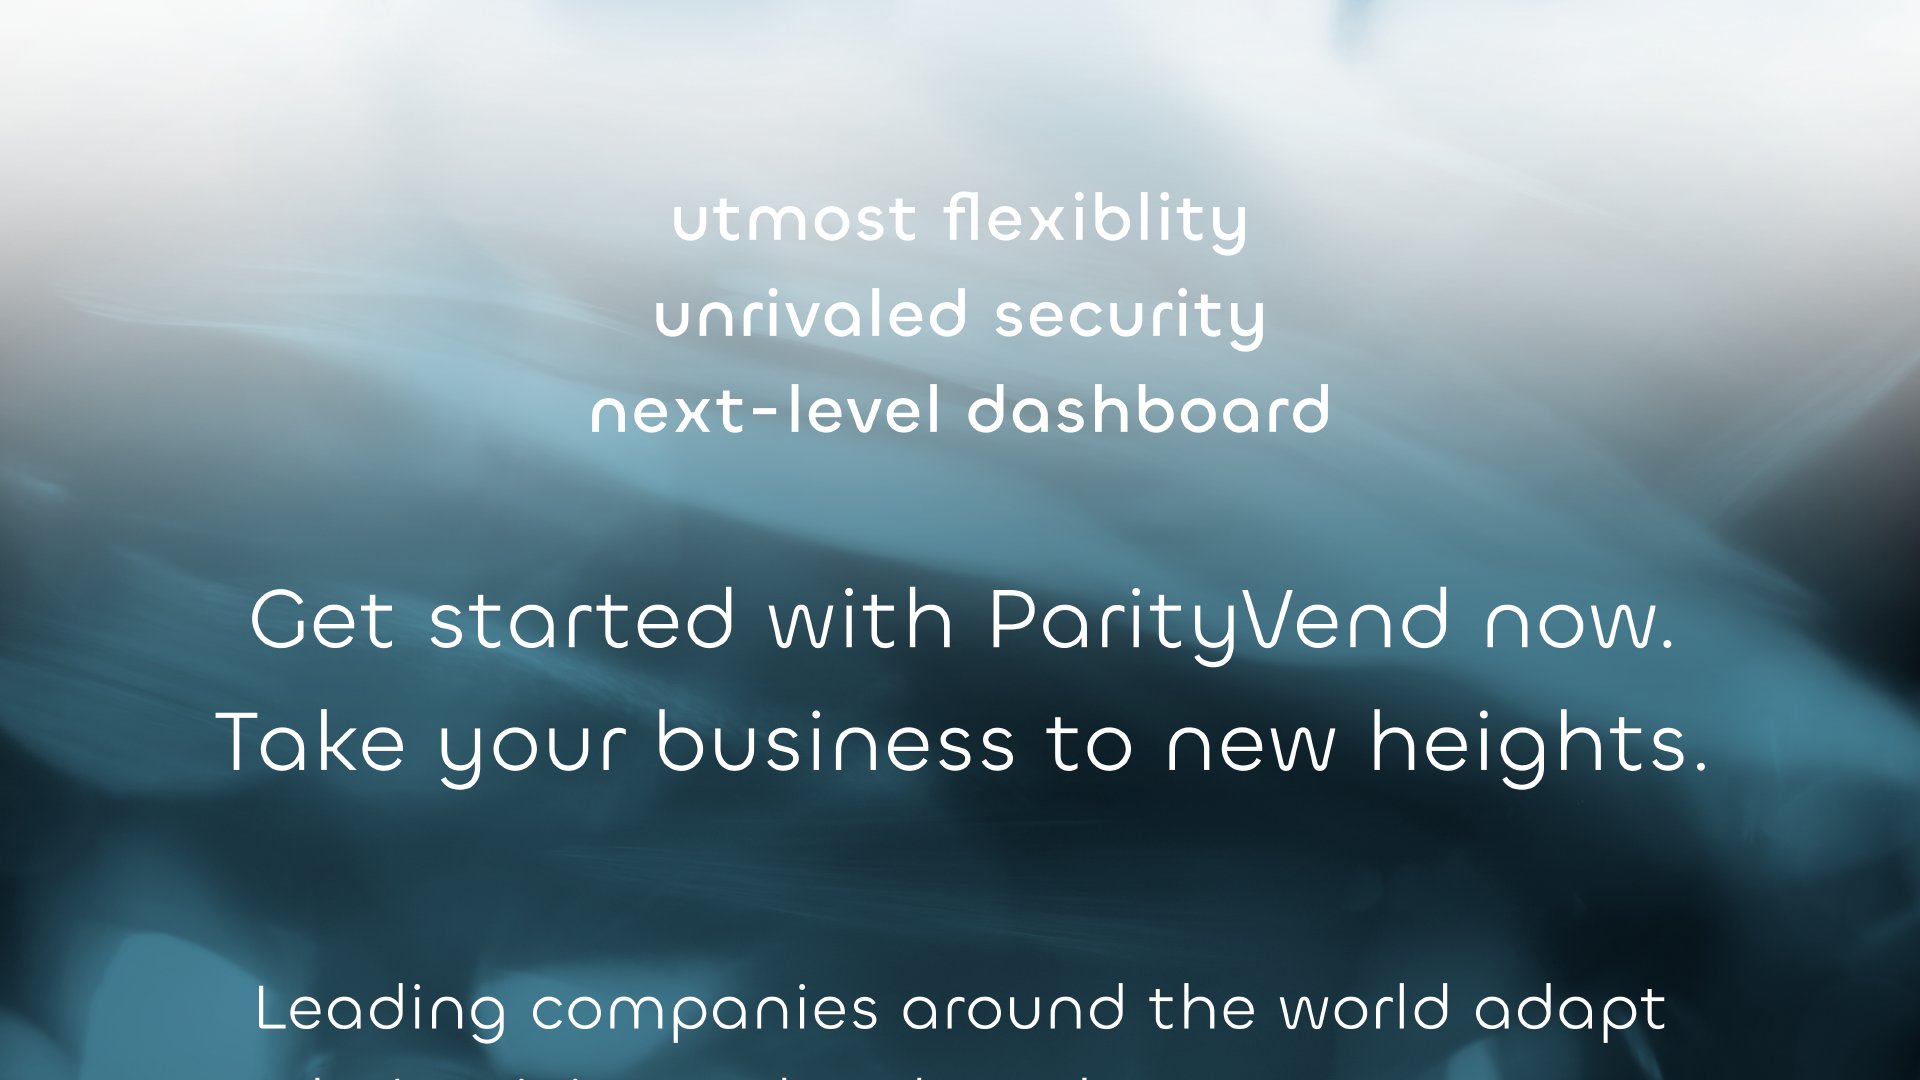 Utmost flexibility. Unrivaled security. Next-level dashboard. Get started with ParityVend now. Take your business to new heights. Leading companies around the world adapt their pricing to local markets. Now, you can too.